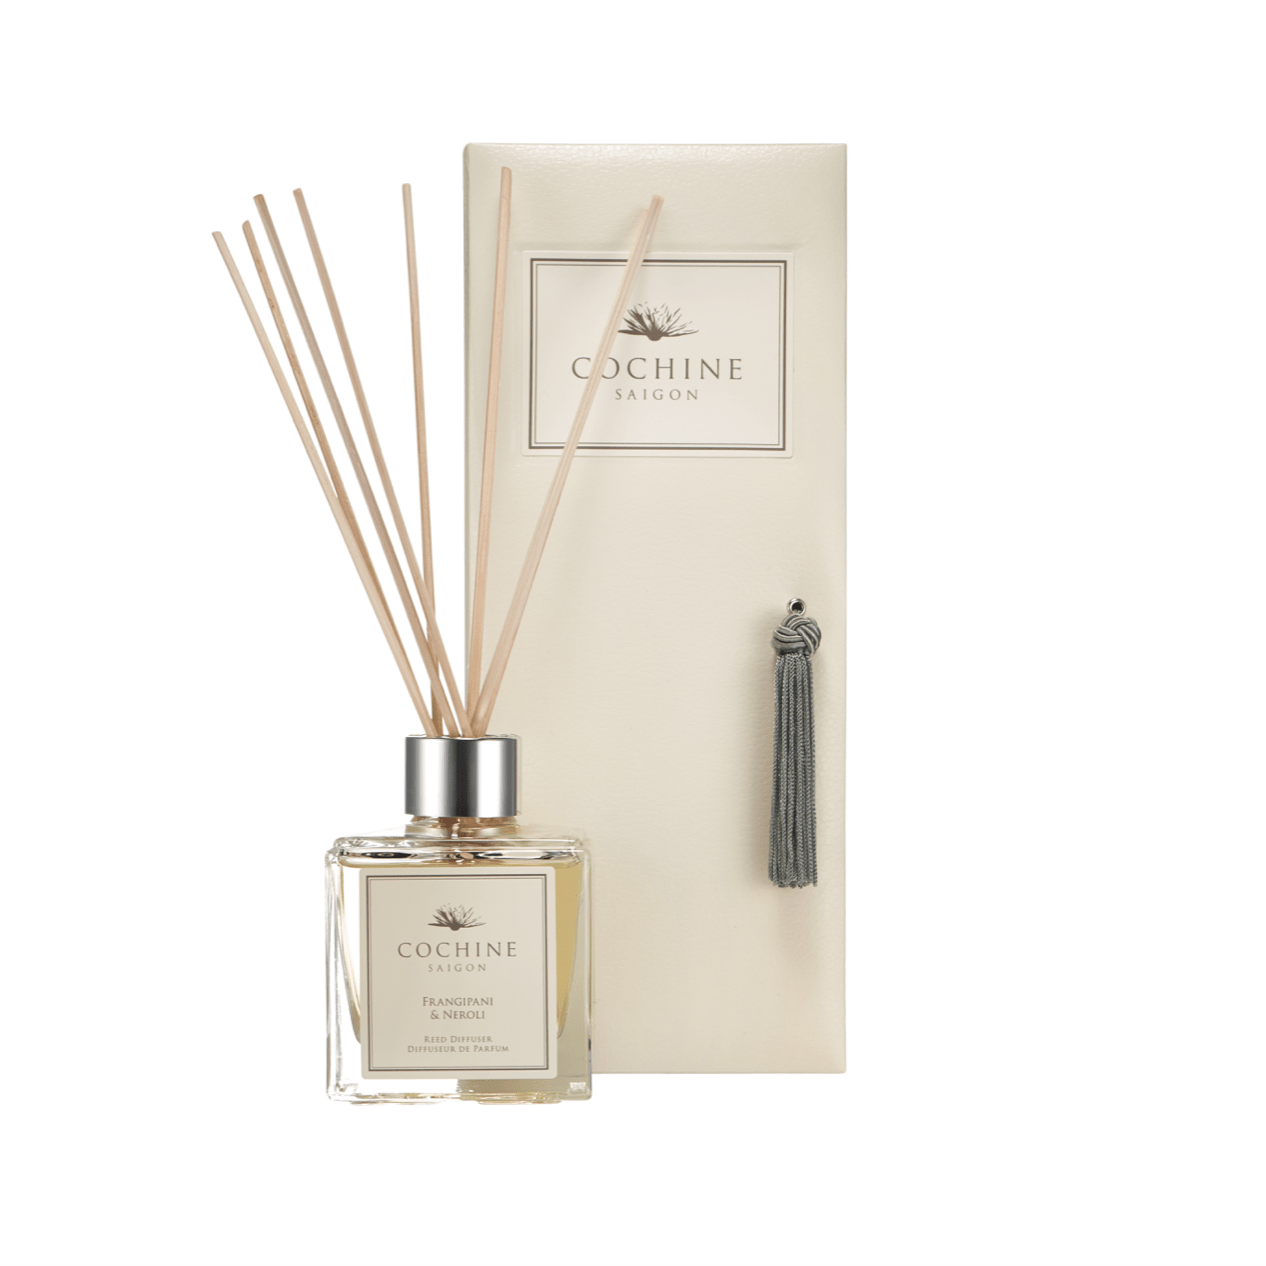 Cochine Home Fragrances of Cochines luxury scented candles and Cochine reed diffuers in Cochine Frangipani & Neroli Diffuser